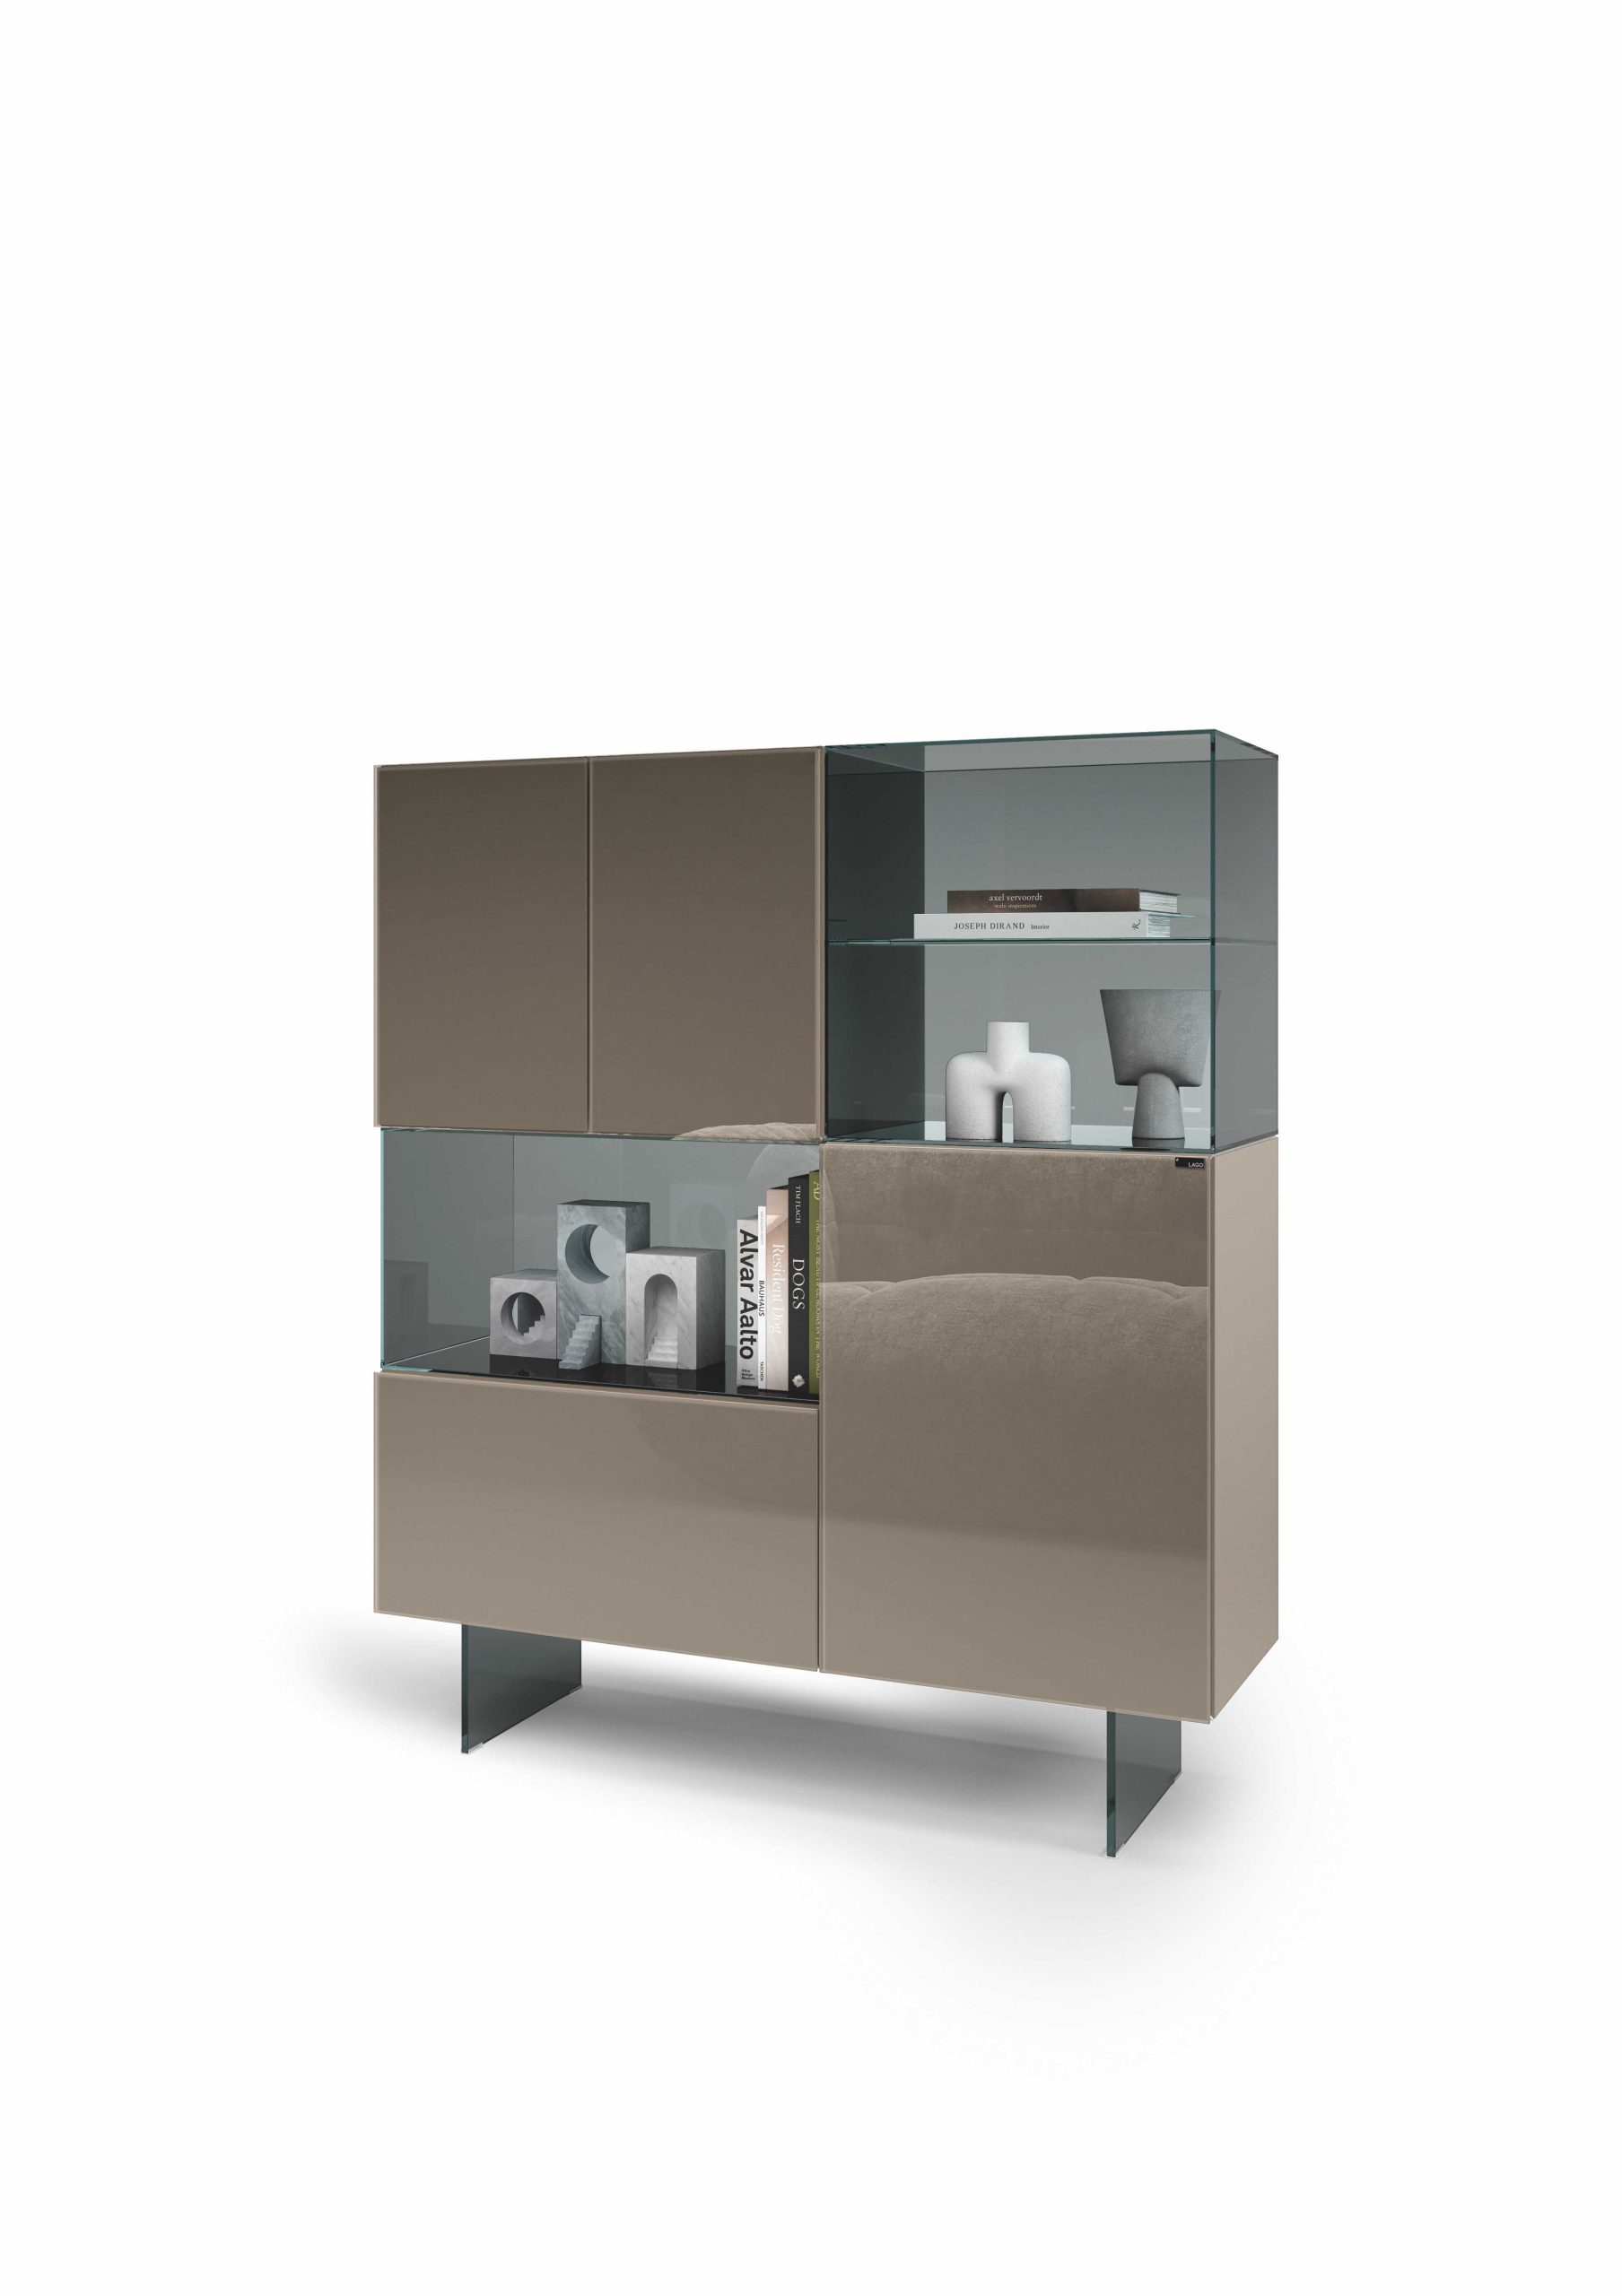 36e8 Glass Sideboard Product Image